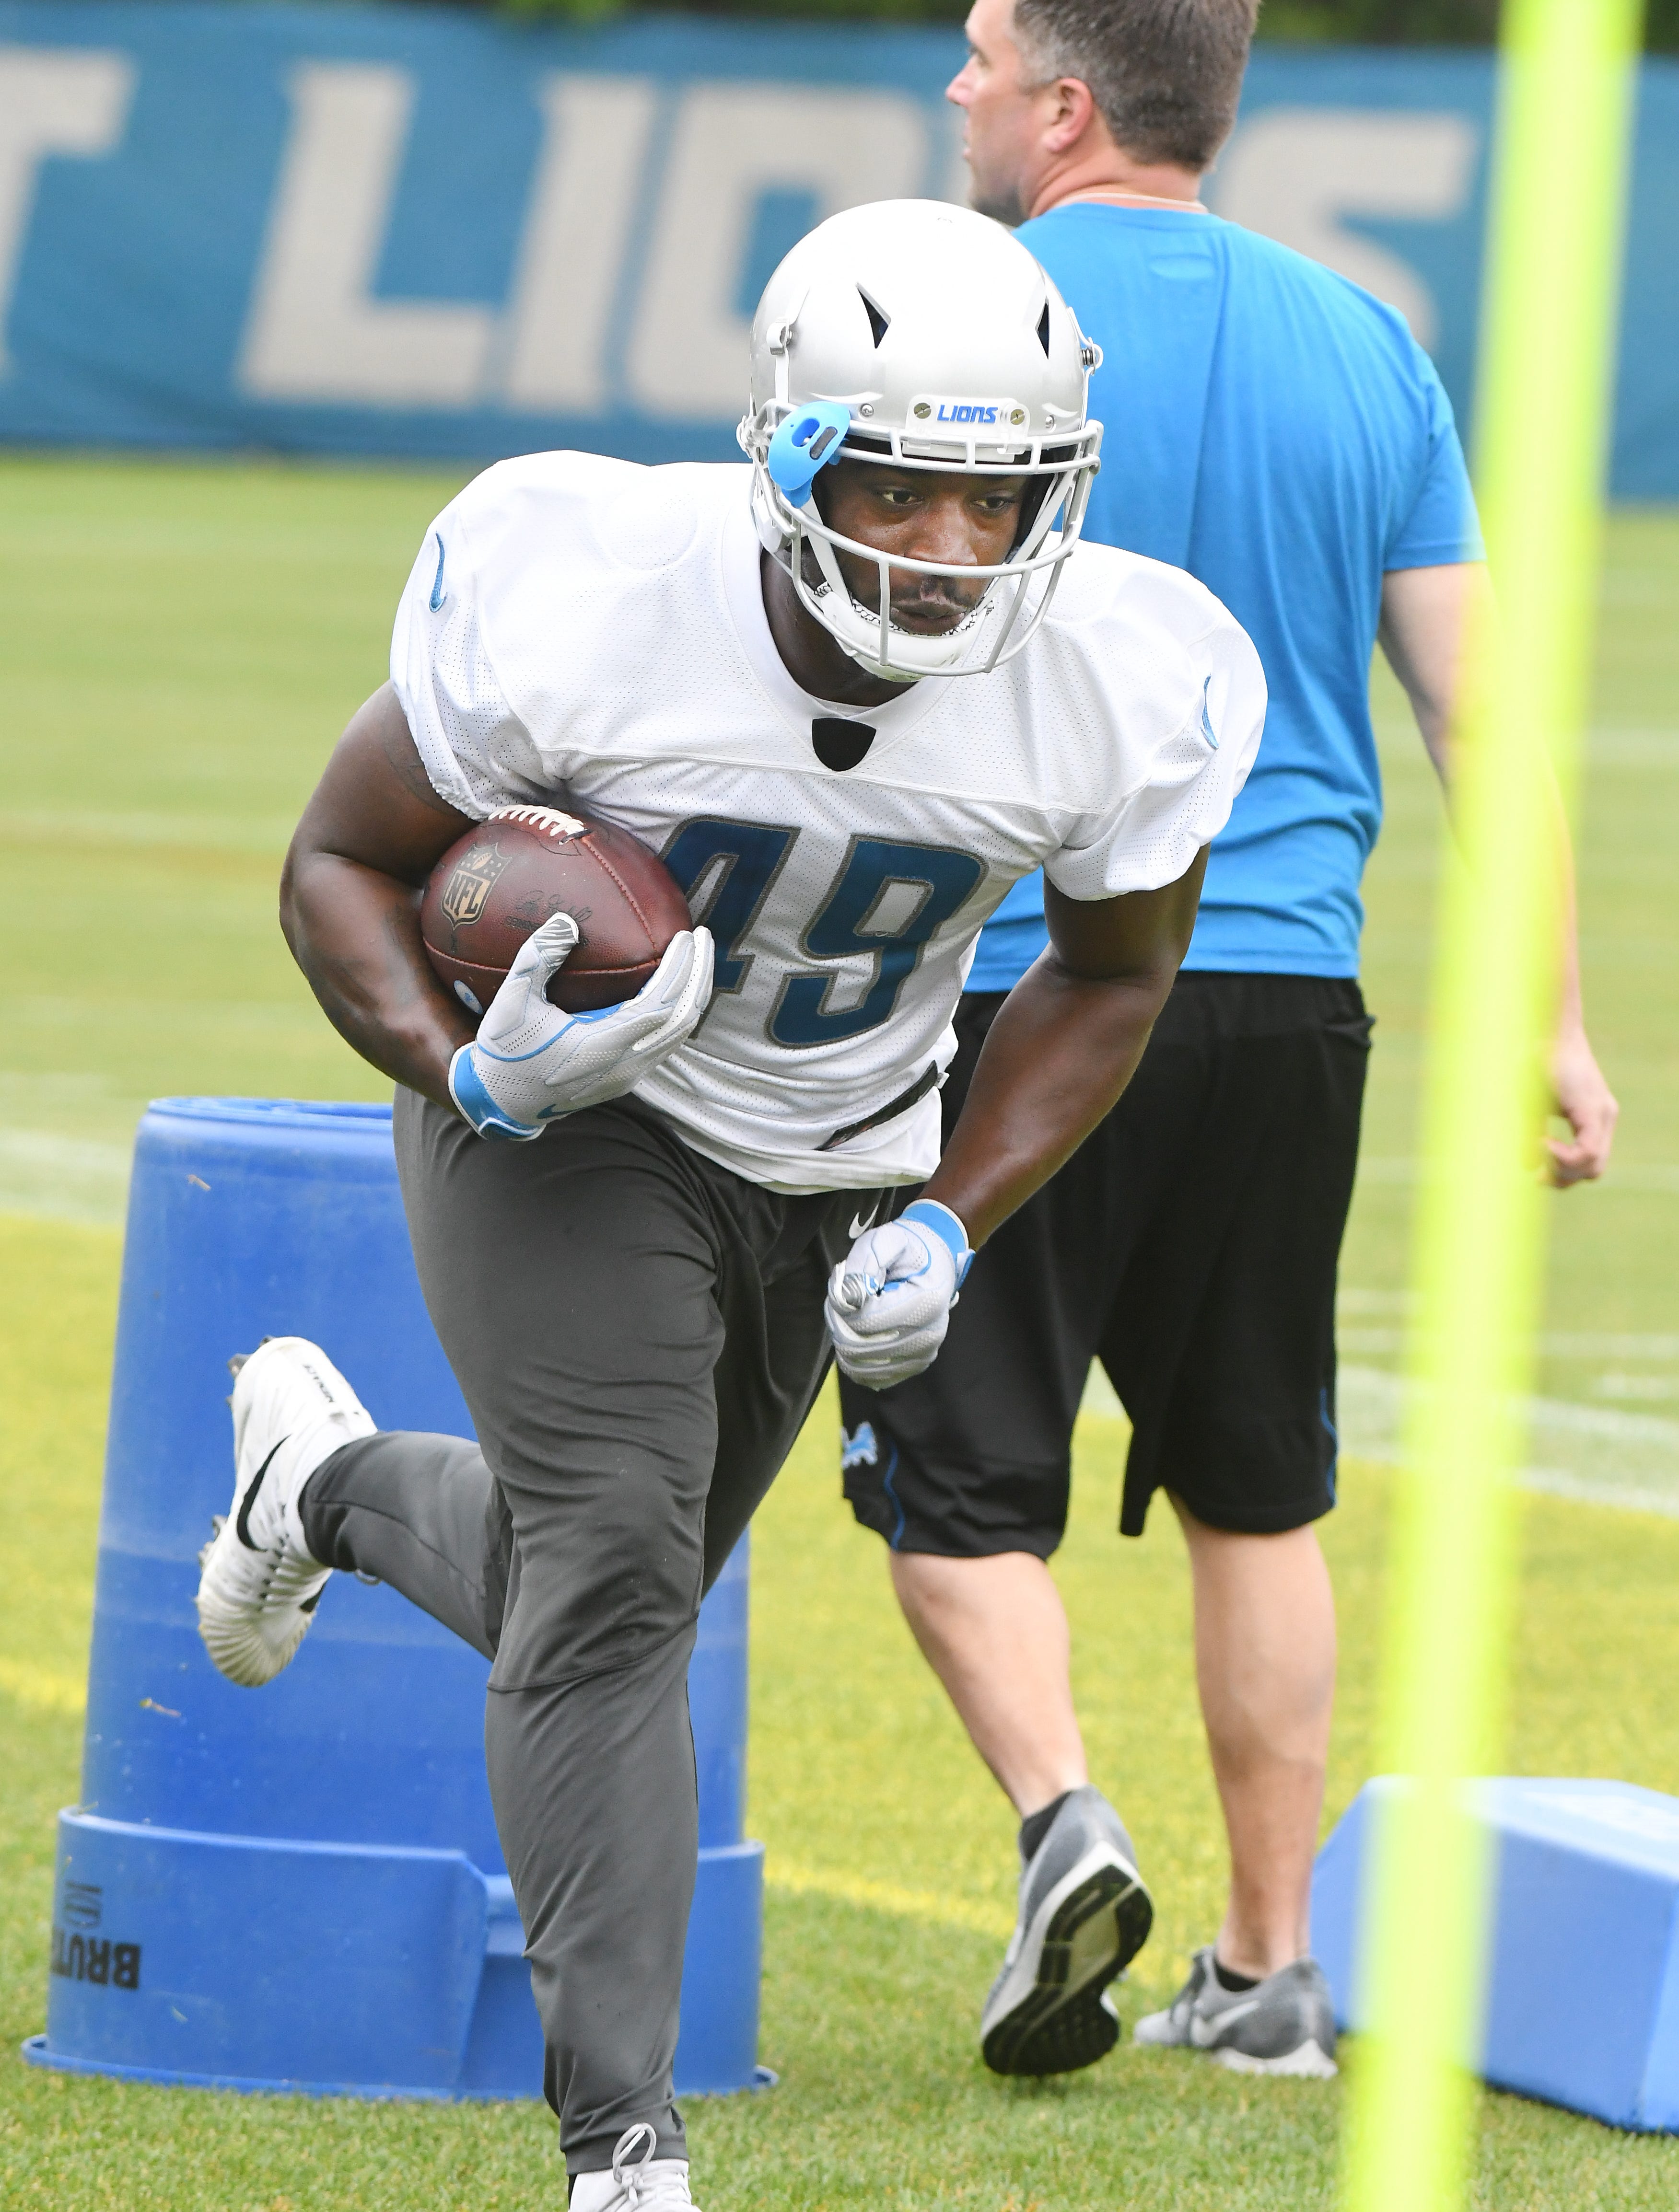 Lions running back Mark Thompson works around the obstacles during drills.